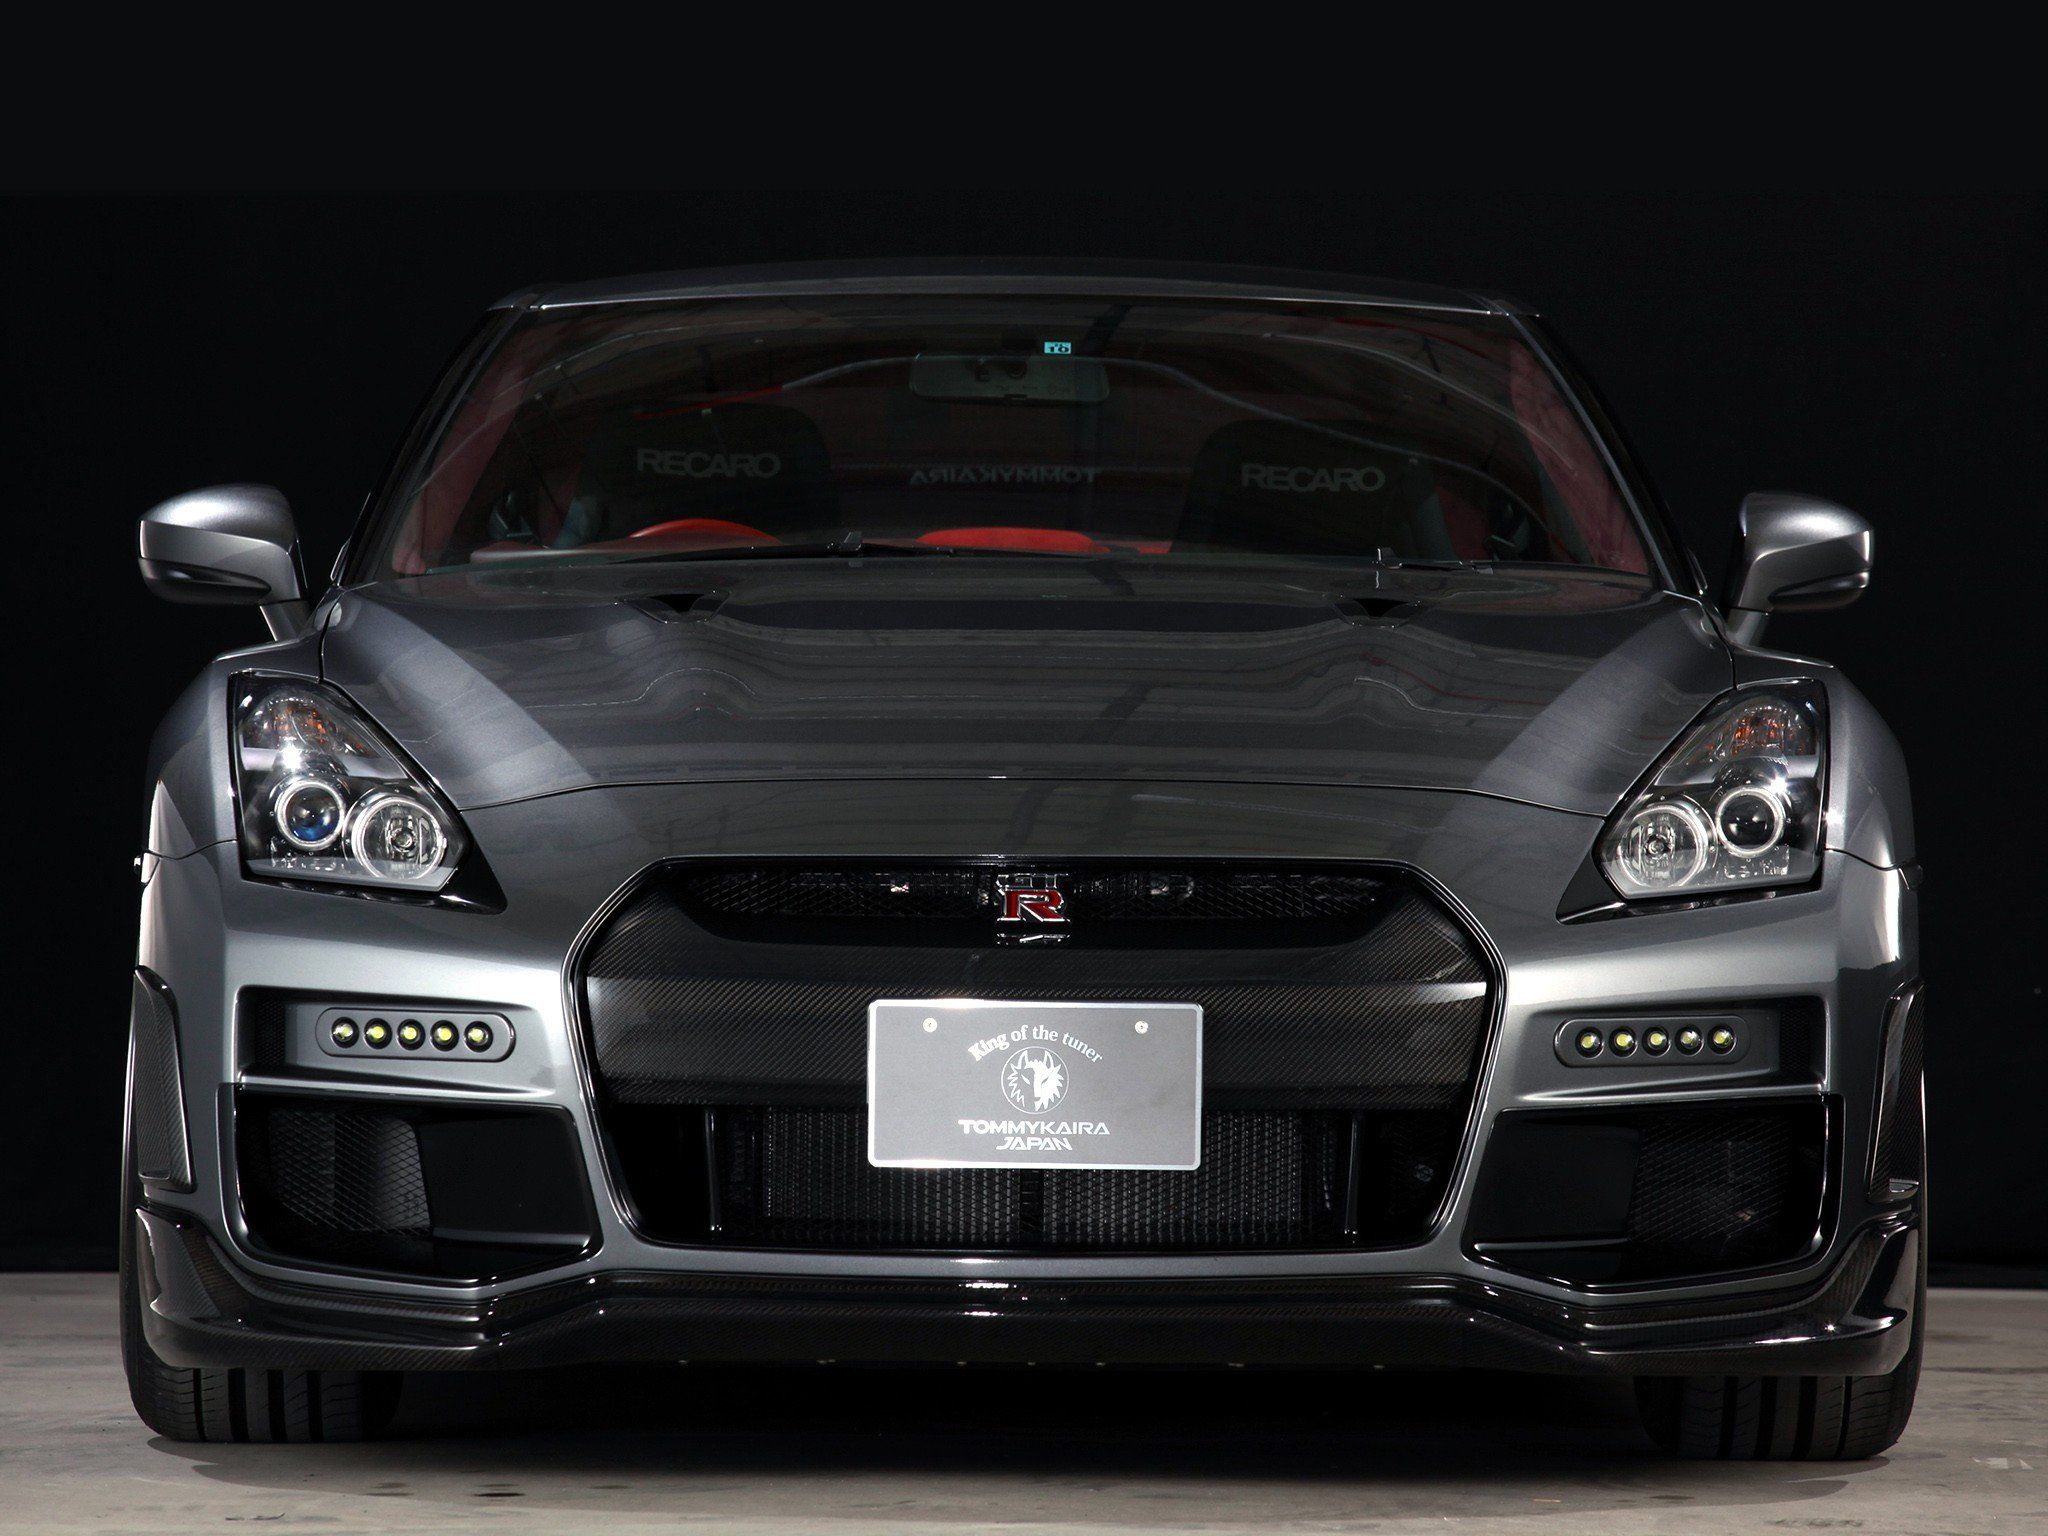 R35 Wallpapers Group